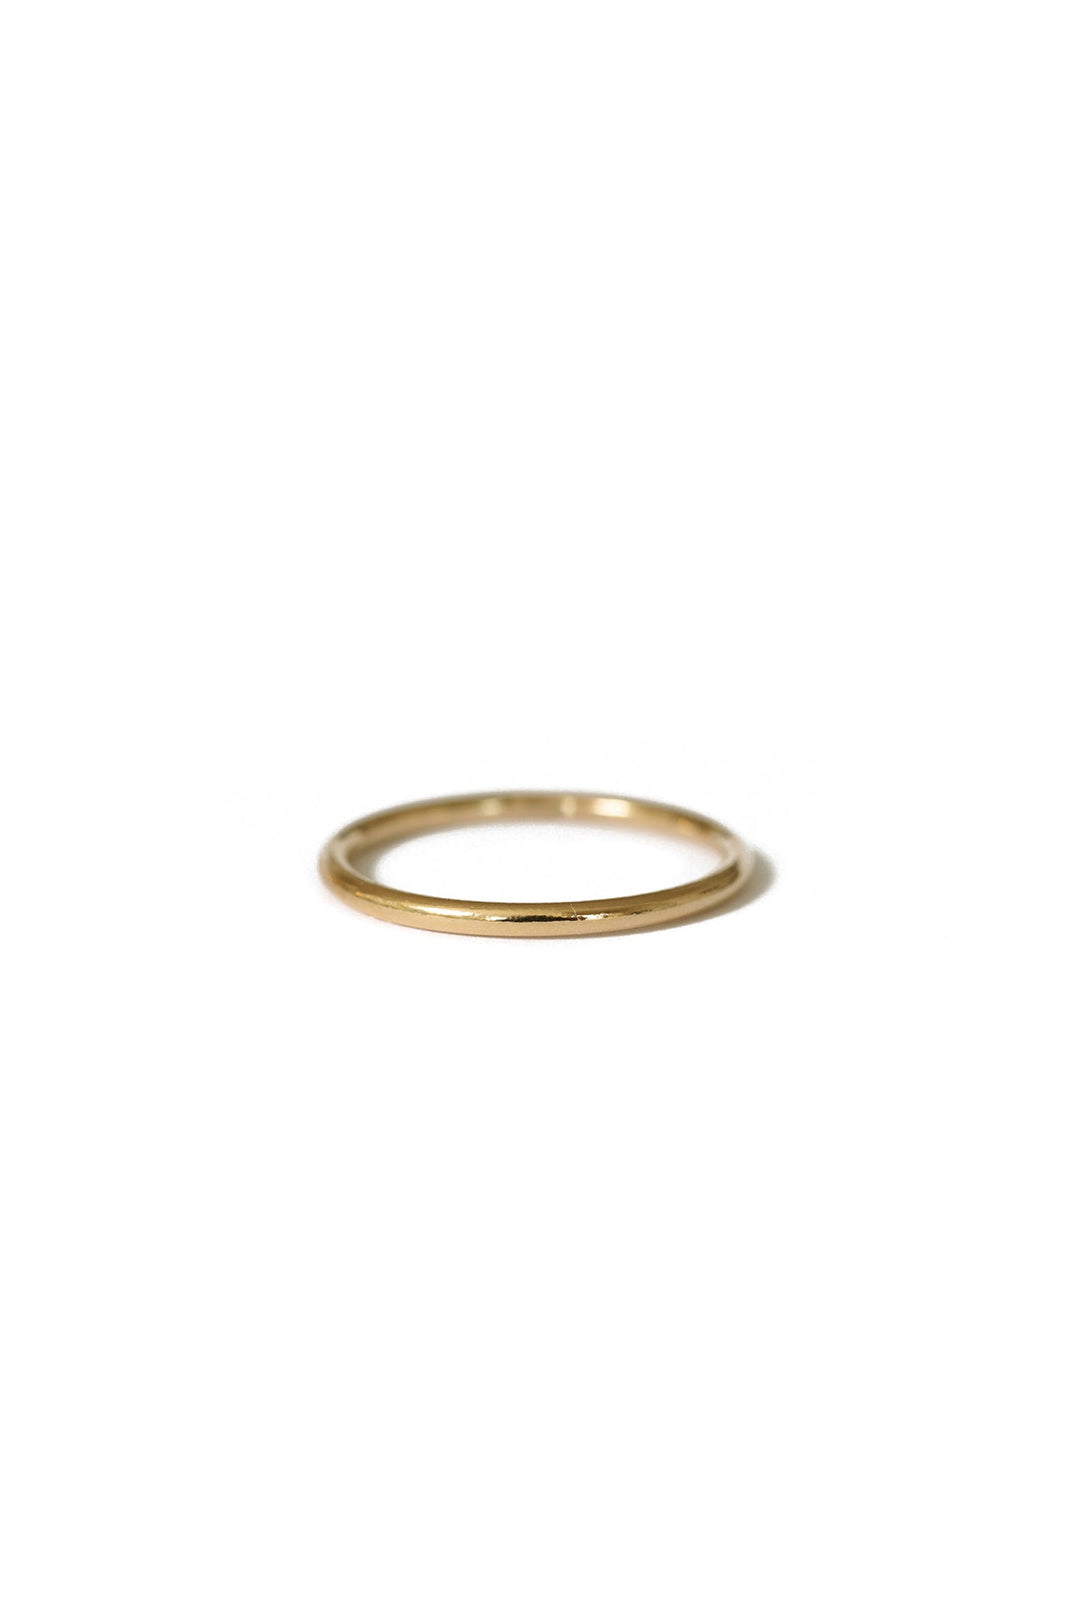 Simone Band Ring 14kt Gold Fill